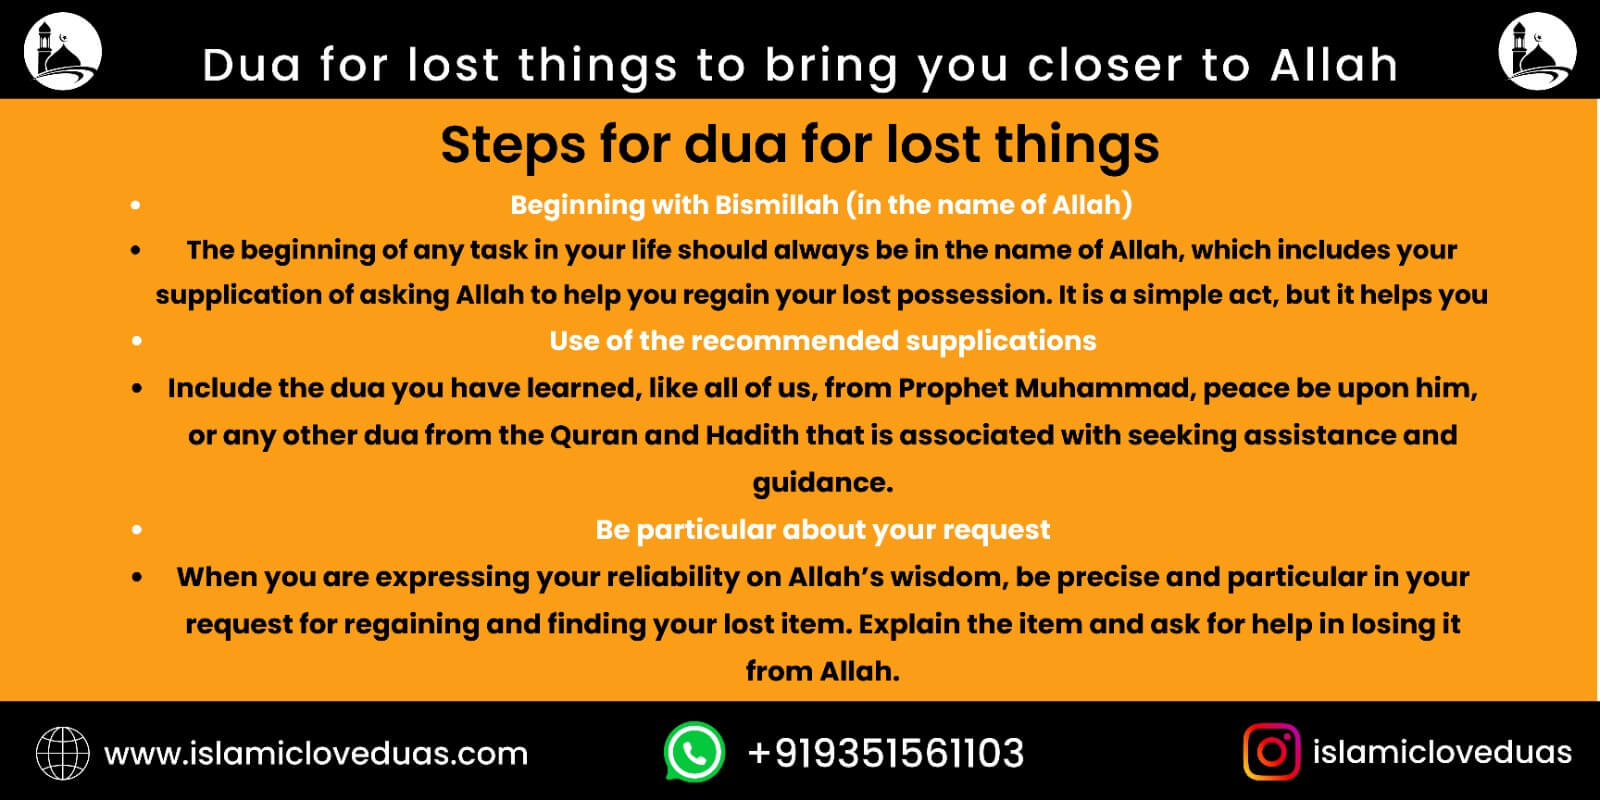 Dua for lost things to bring you closer to Allah